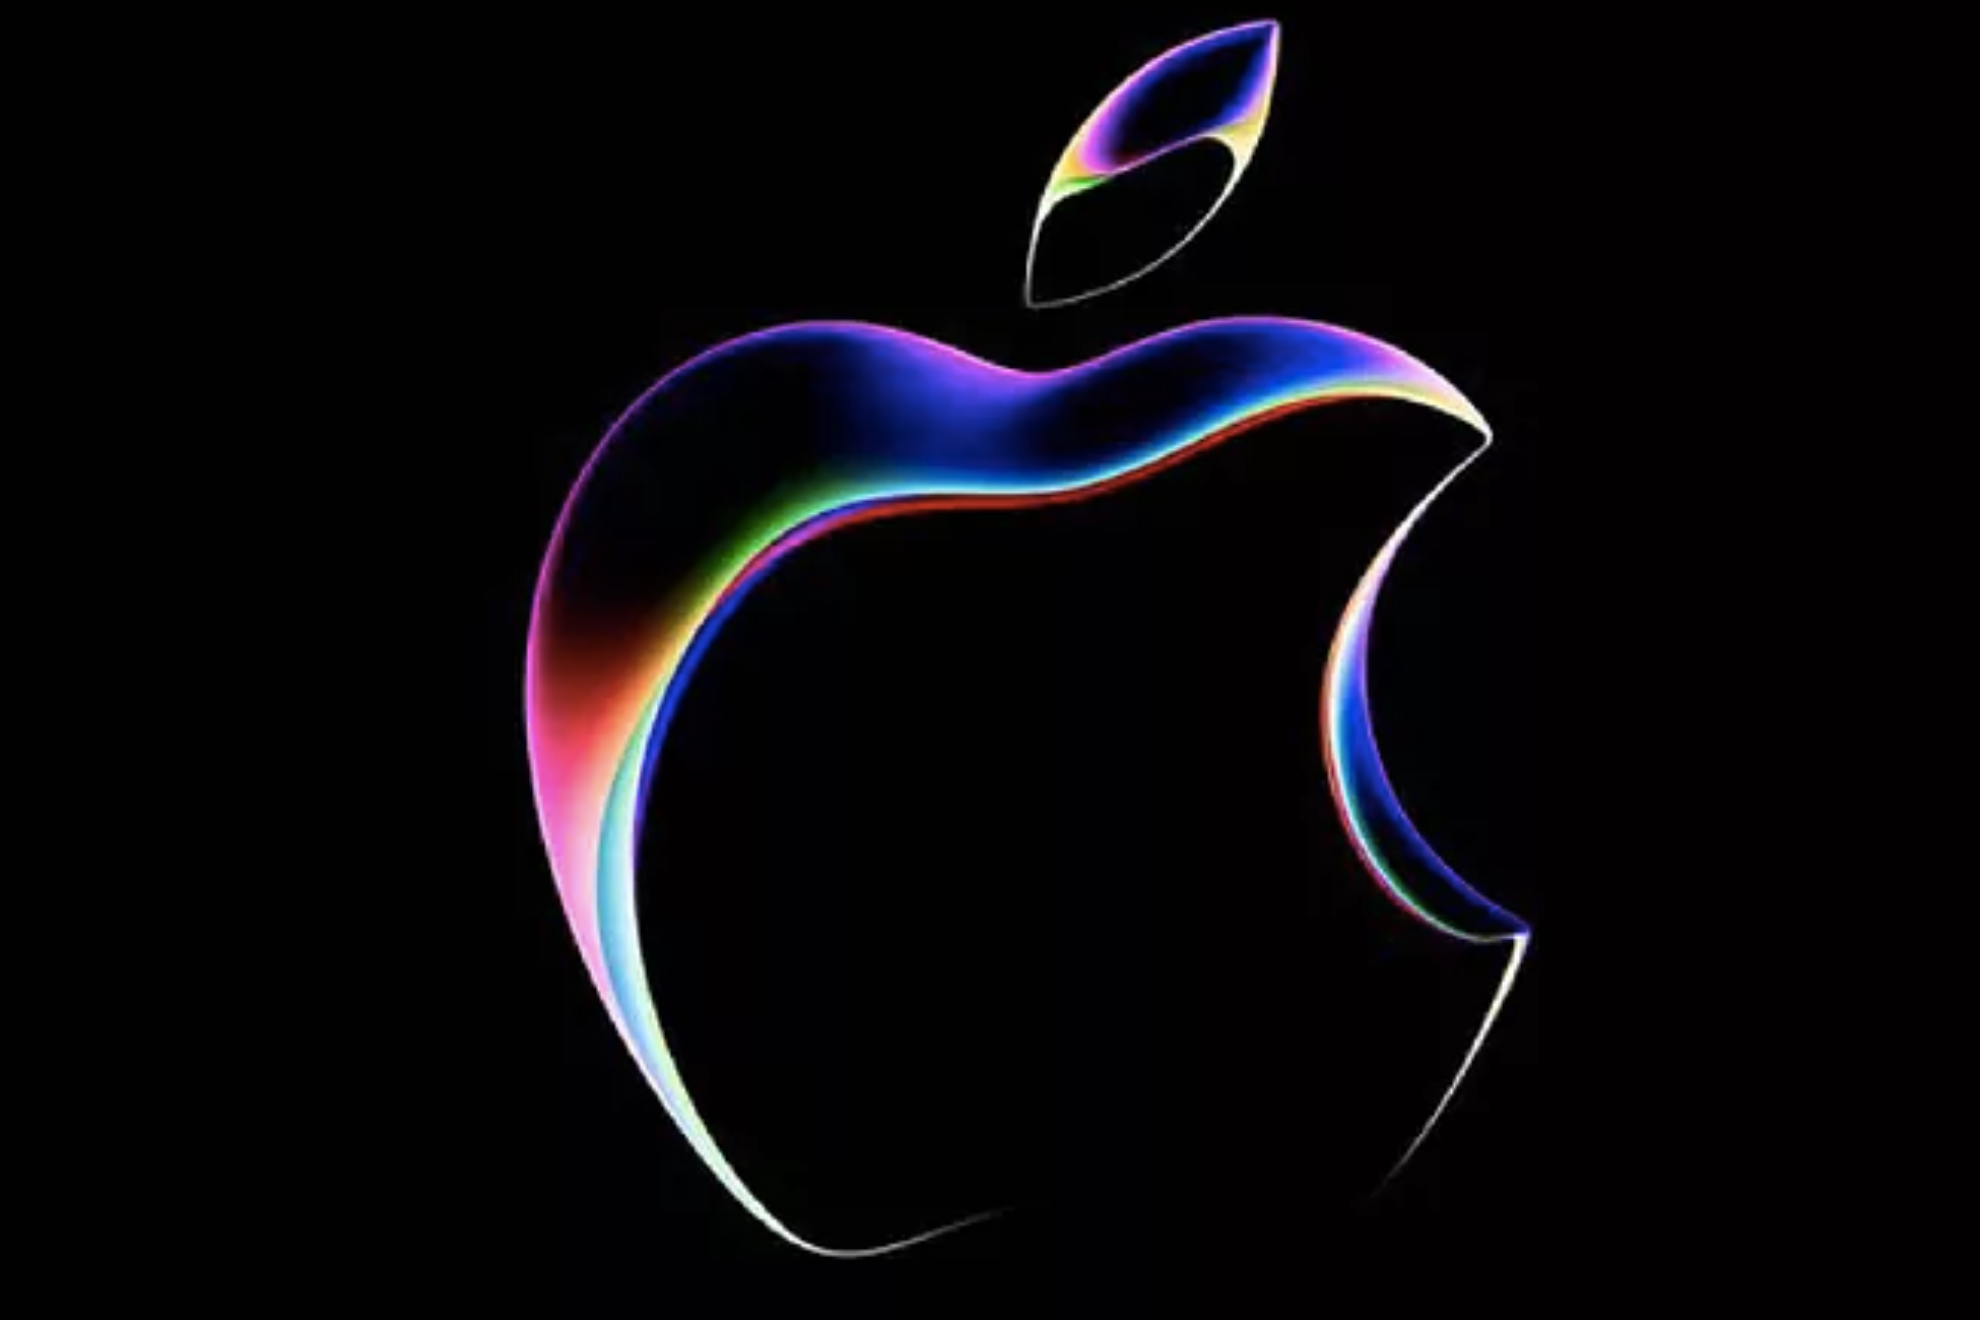 What to expect from the Apple event 2023?